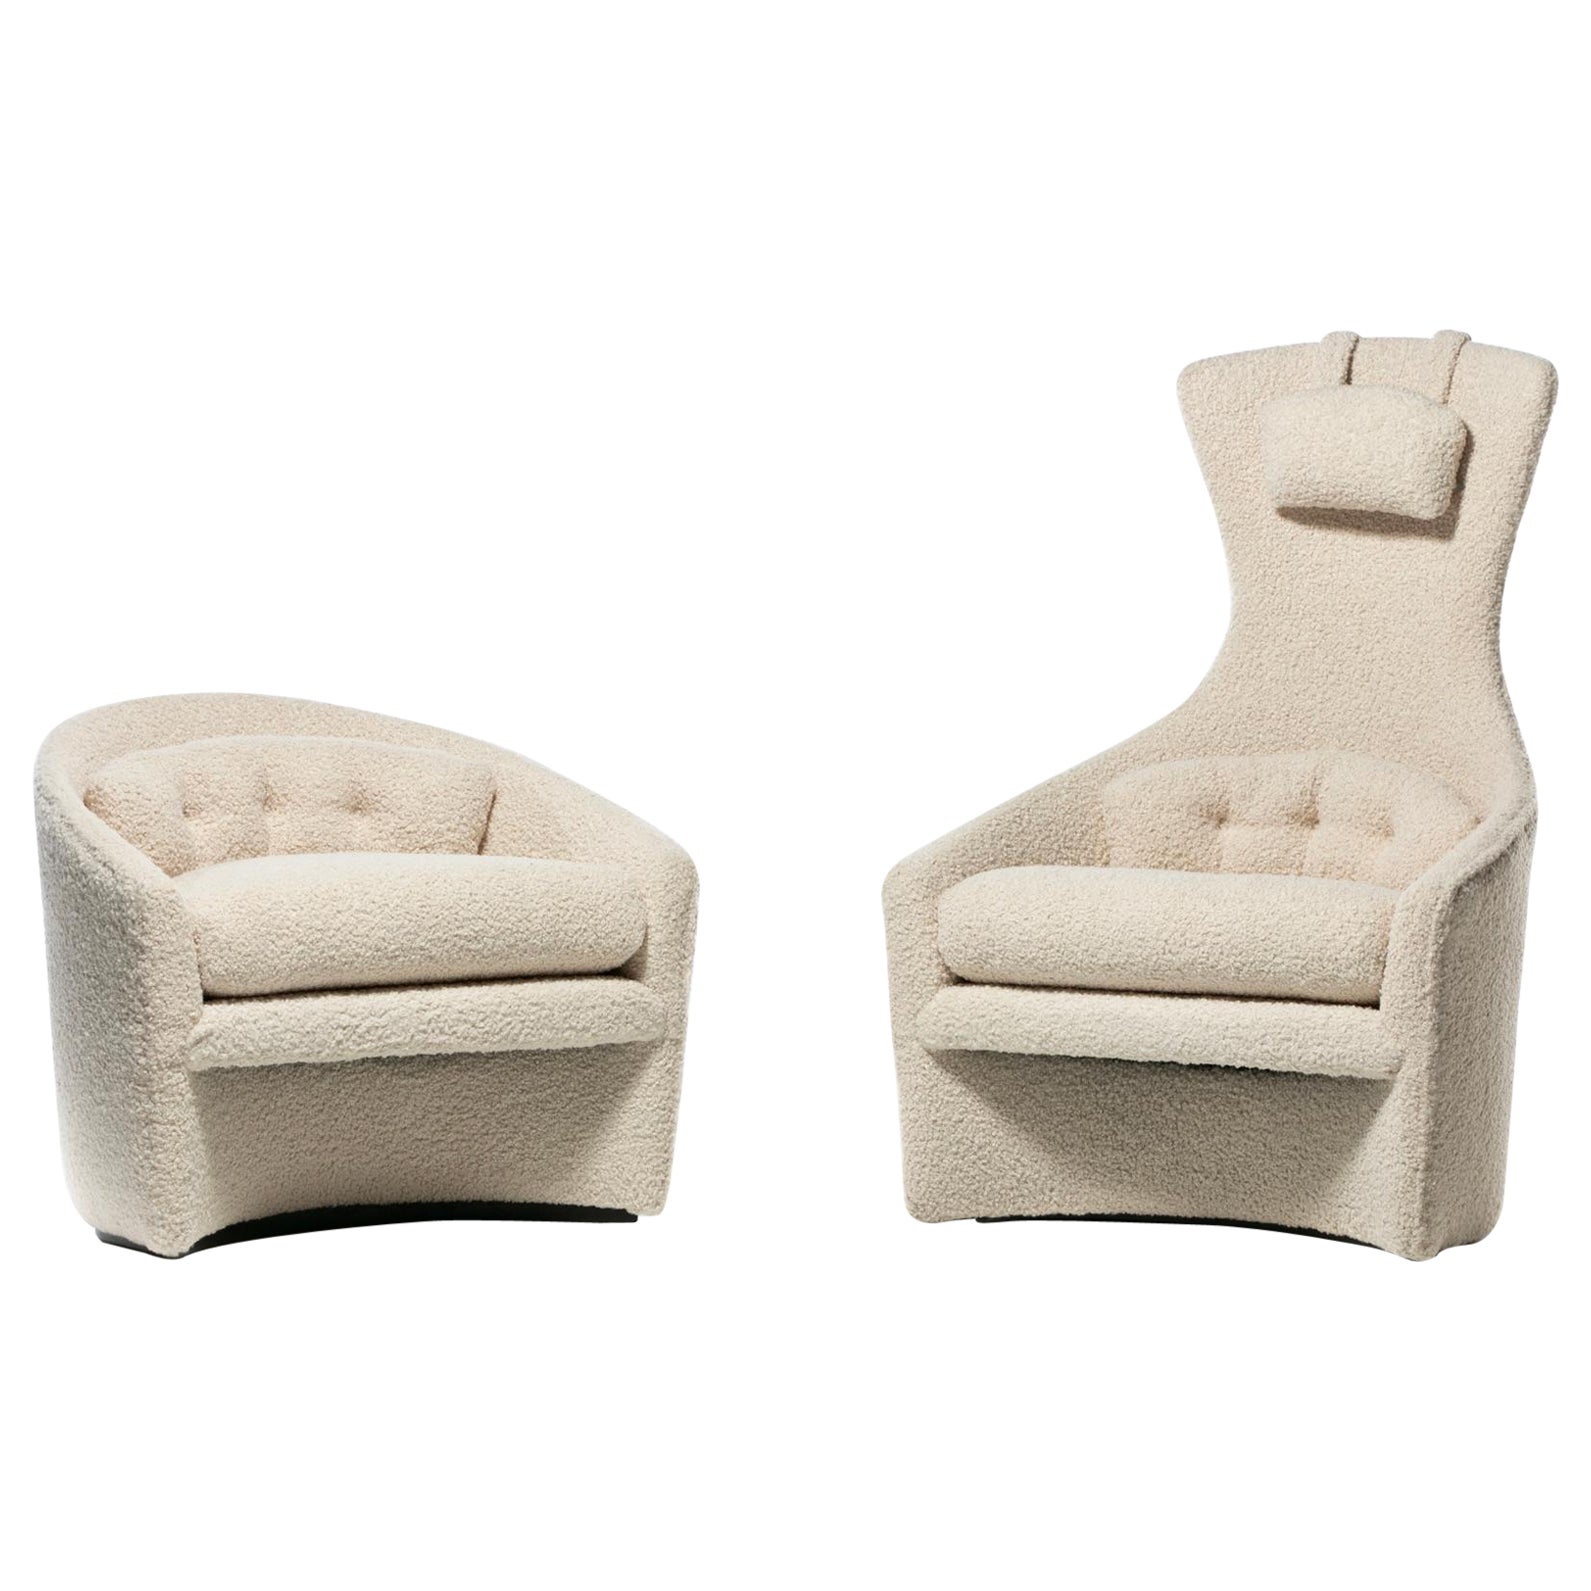 Adrian Pearsall Sculptural Mom & Pop Lounge Chairs in Ivory Bouclé, c. 1960s